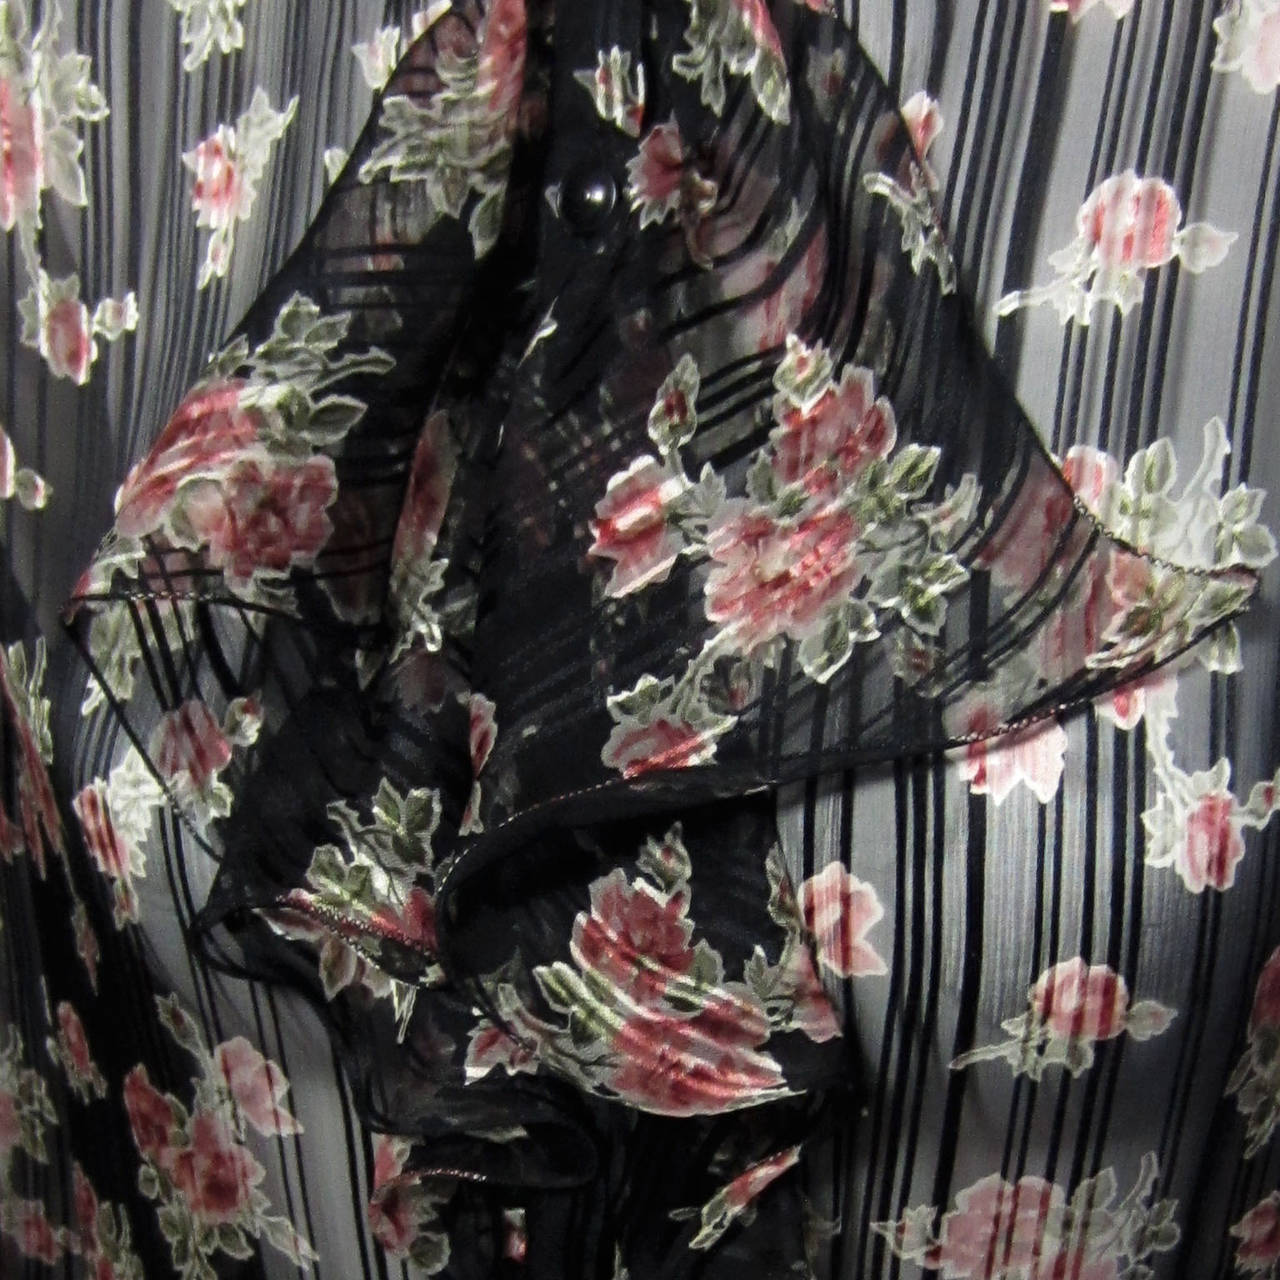 The sheer, black silk of this UNGARO blouse features a staggered, stripe design. Layered on top, there is a detailed rose print covering the entire blouse. The front opening features a tiered, ruffle detail originating at the neck. There is a small,